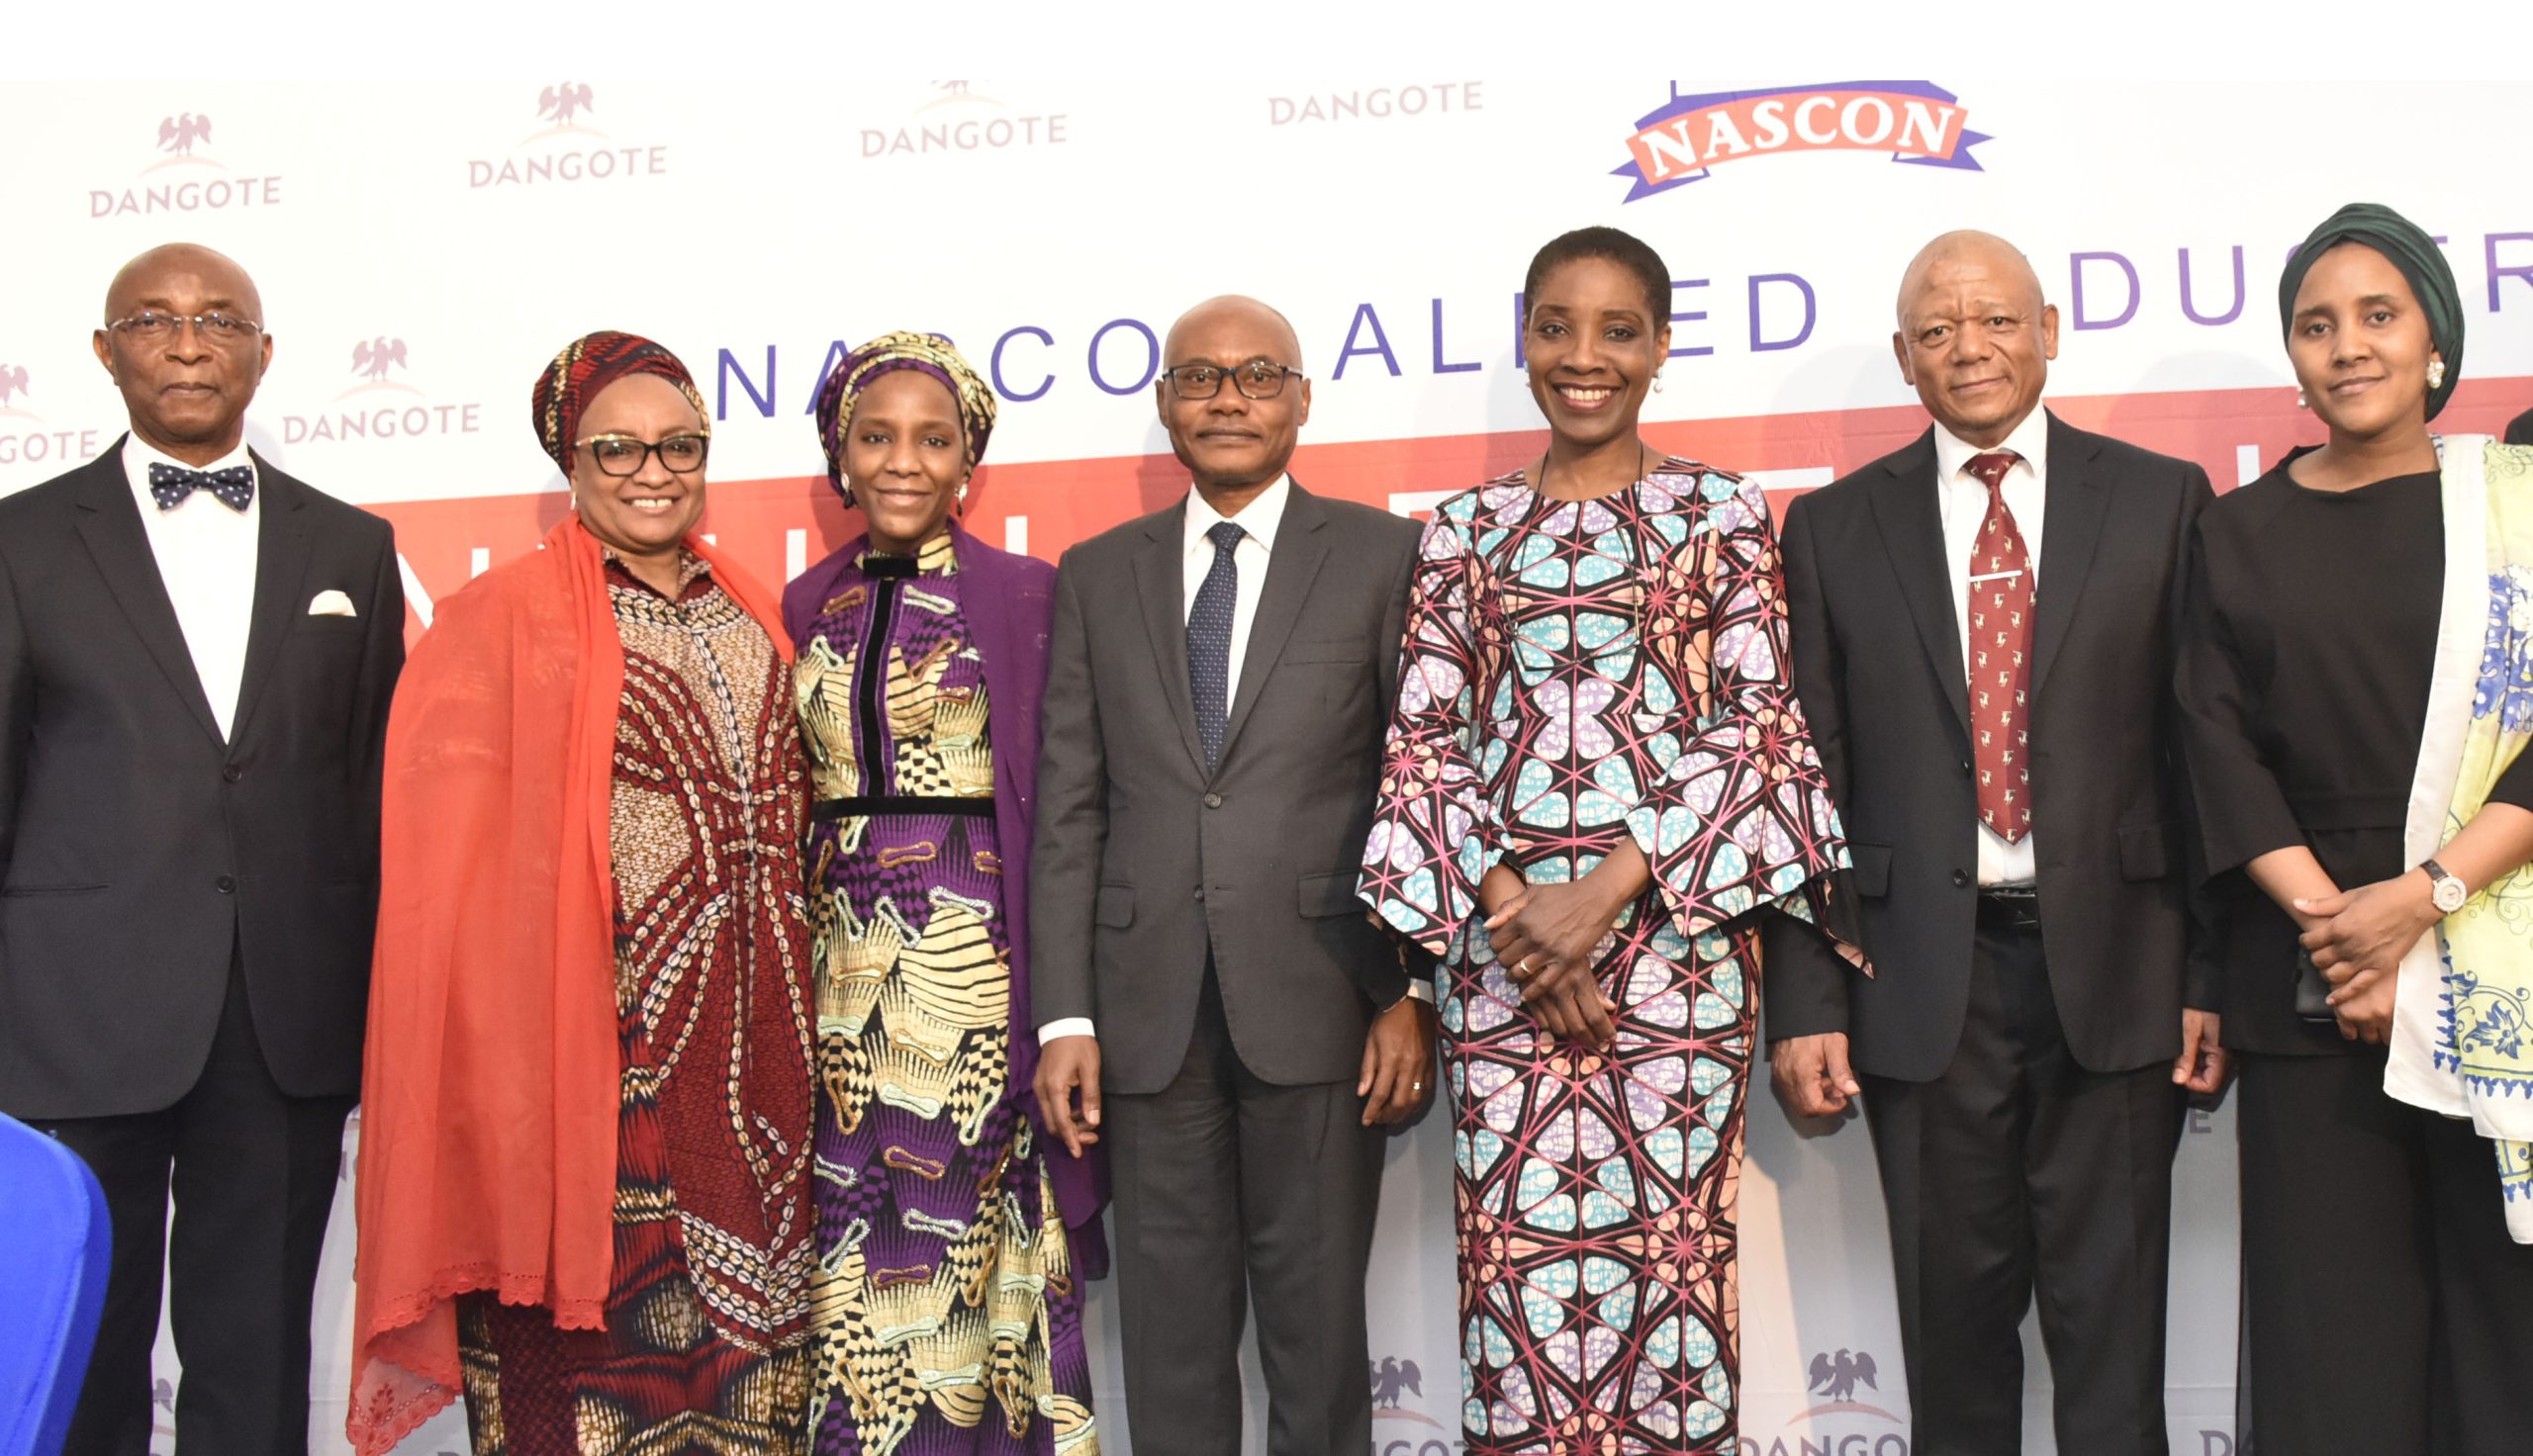 L-R: Independent Director, NASCON Allied Industries Plc, Chris Ogbechie; Director NASCON Allied Industries Plc, Fatima Wali-Abdurrahman; Director, NASCON Allied Industries Plc, Halima Aliko Dangote; Group Managing Director, Dangote Industries Limited/Director, NASCON Allied Industries Plc, Olakunle Alake; Chairperson, NASCON Allied Industries Plc, 'Yemisi Ayeni; Acting Managing Director, NASCON Allied Industries Plc, Thabo Mabe; and Executive Director, Commercial, NASCON Allied Industries Plc, Fatima Aliko Dangote, at the 2021 Annual General Meeting (AGM) of NASCON Allied Industries Plc in Lagos on June 3, 2022